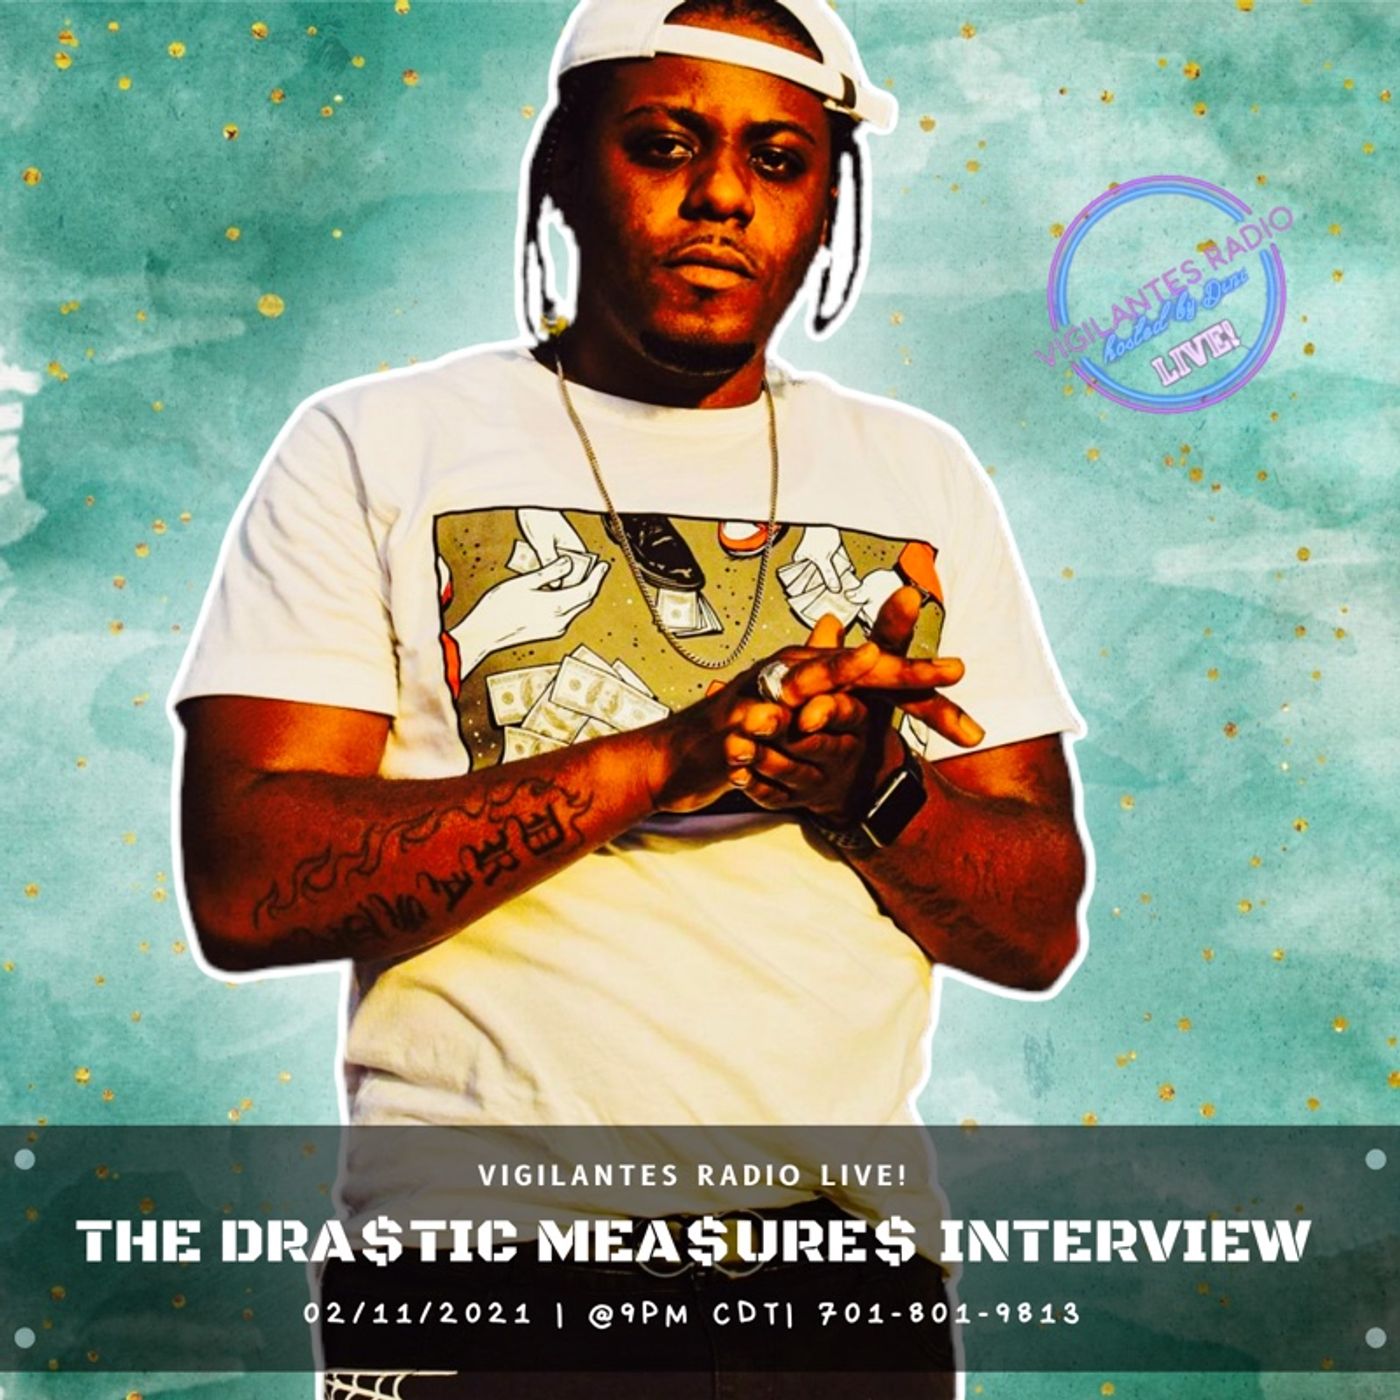 The Dra$tic Mea$ure$ Interview. Image